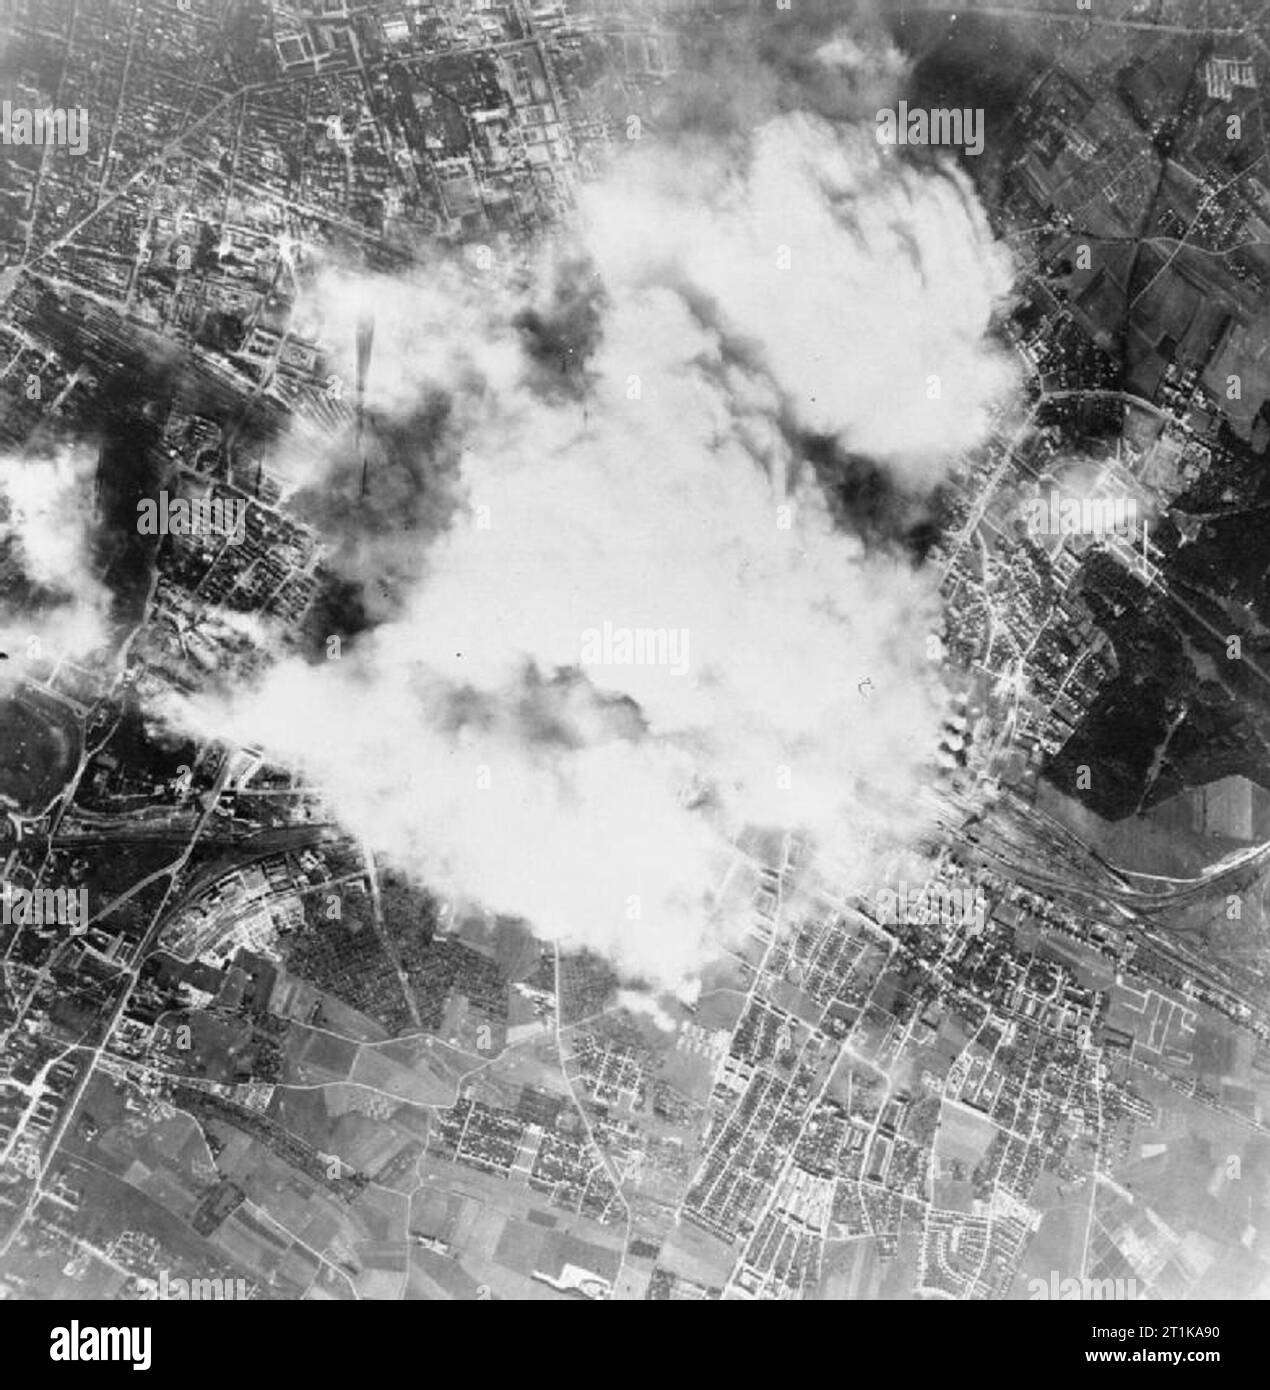 Air Ministry Second World War Official Collection Daylight attack on Munich m/yds (USAAF? 4.10.44?) Image reversed. Stock Photo